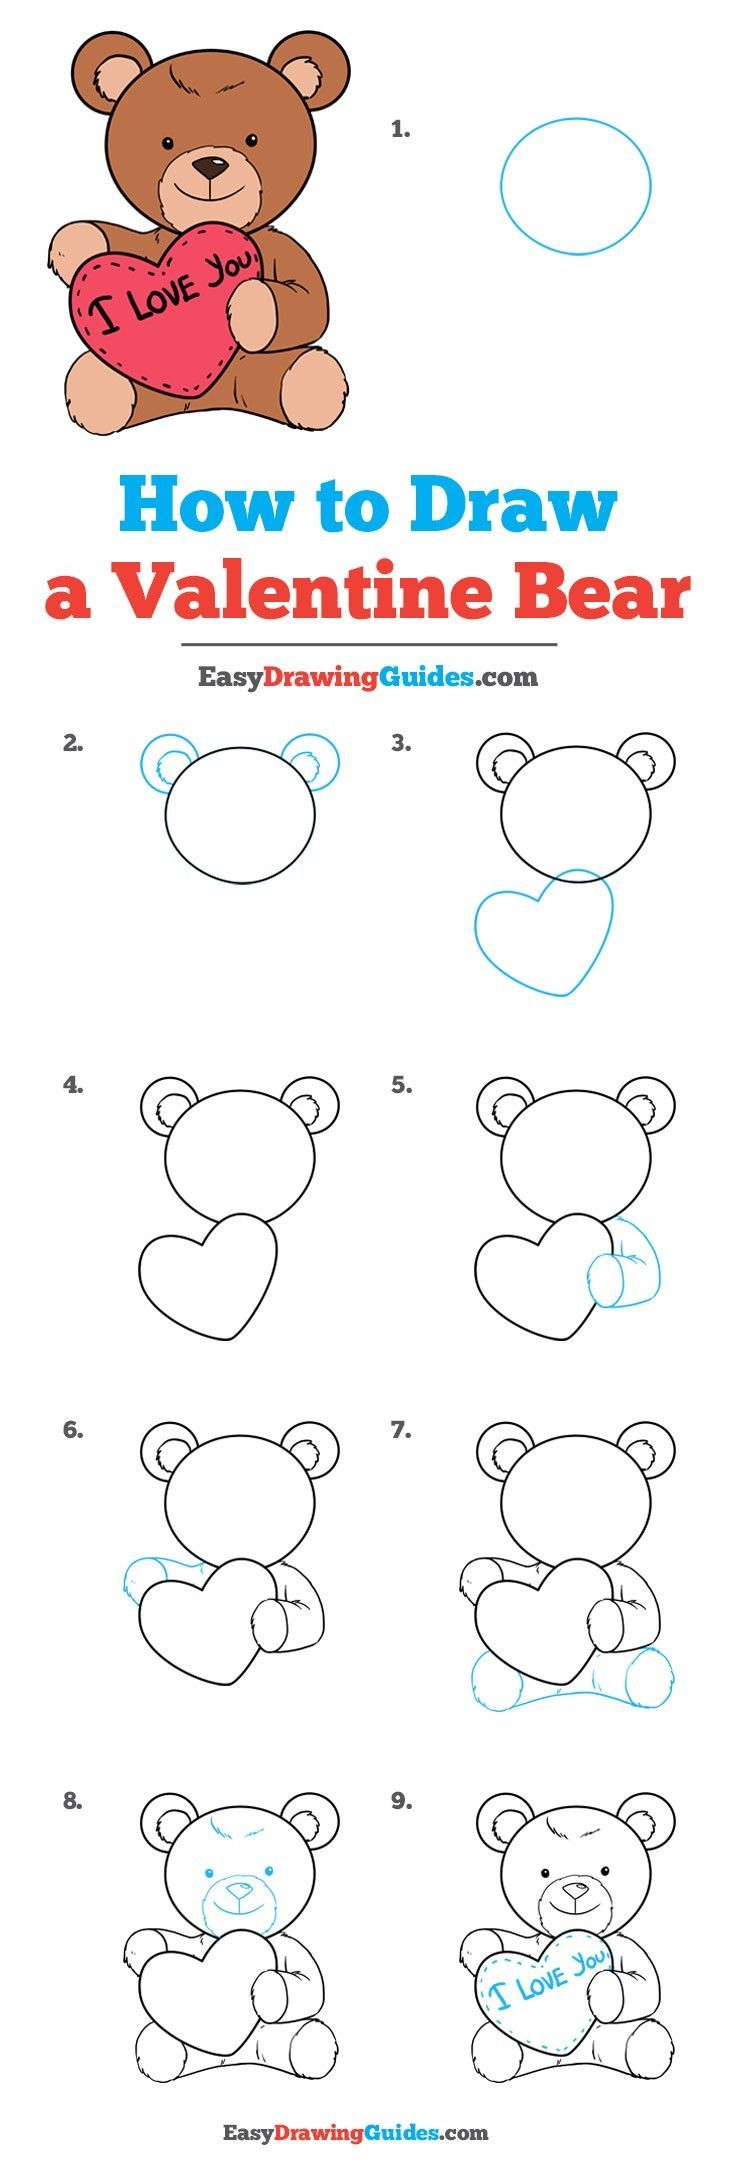 How To Draw A Teddy Bear With A Heart